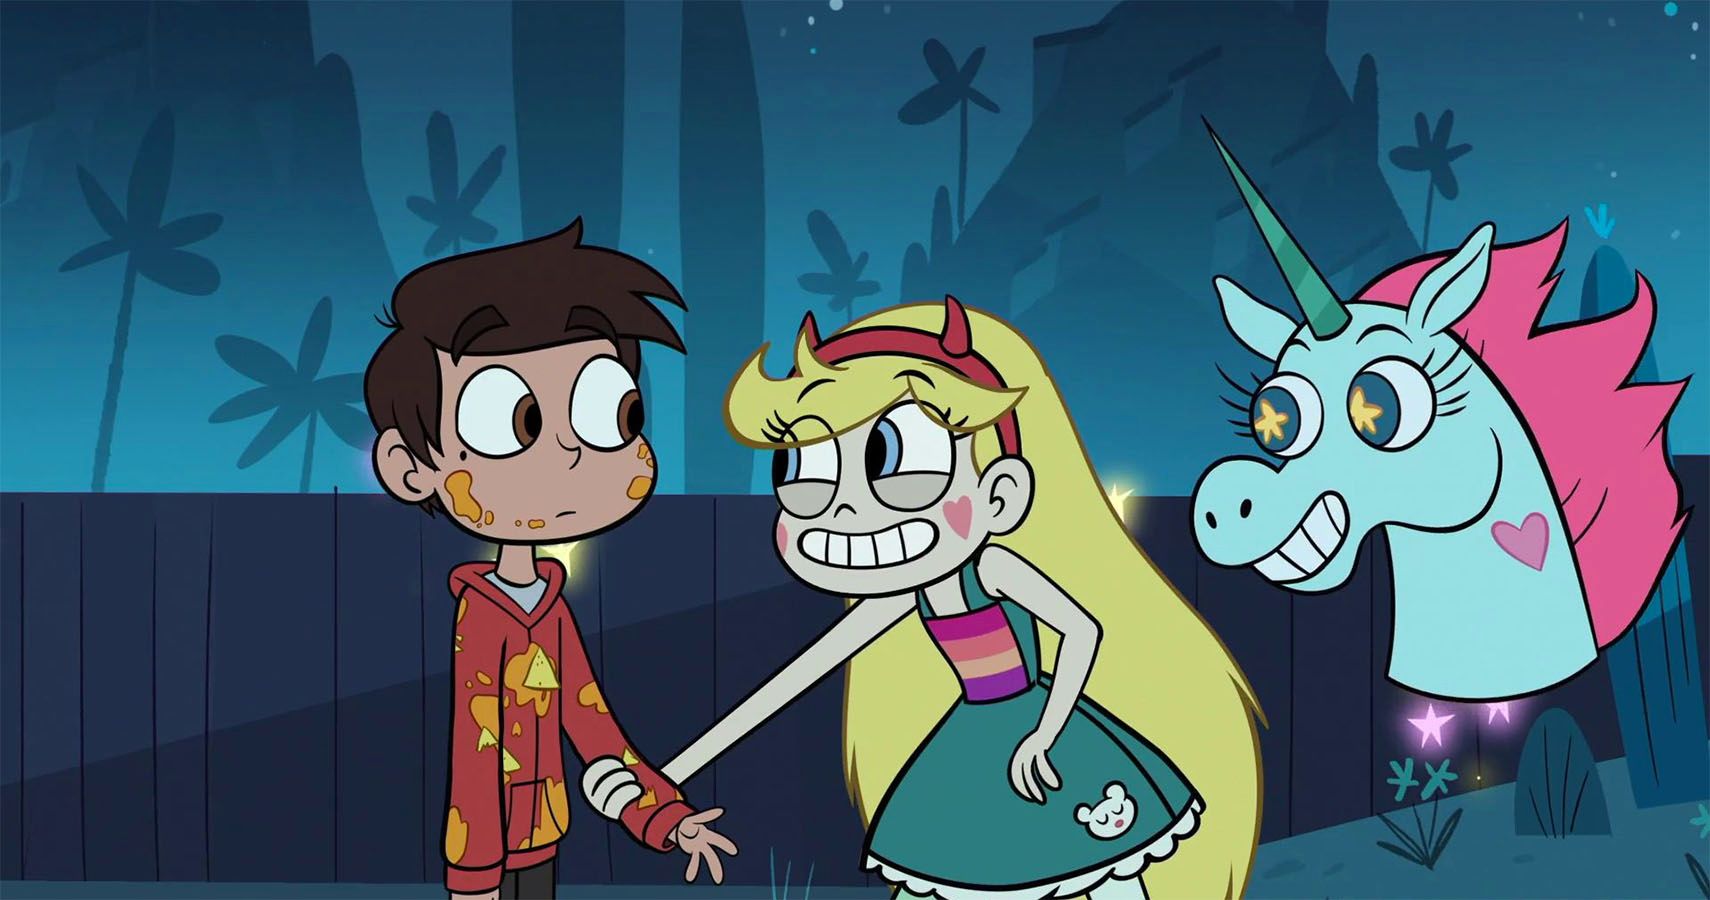 Star Vs The Forces Of Evil Online